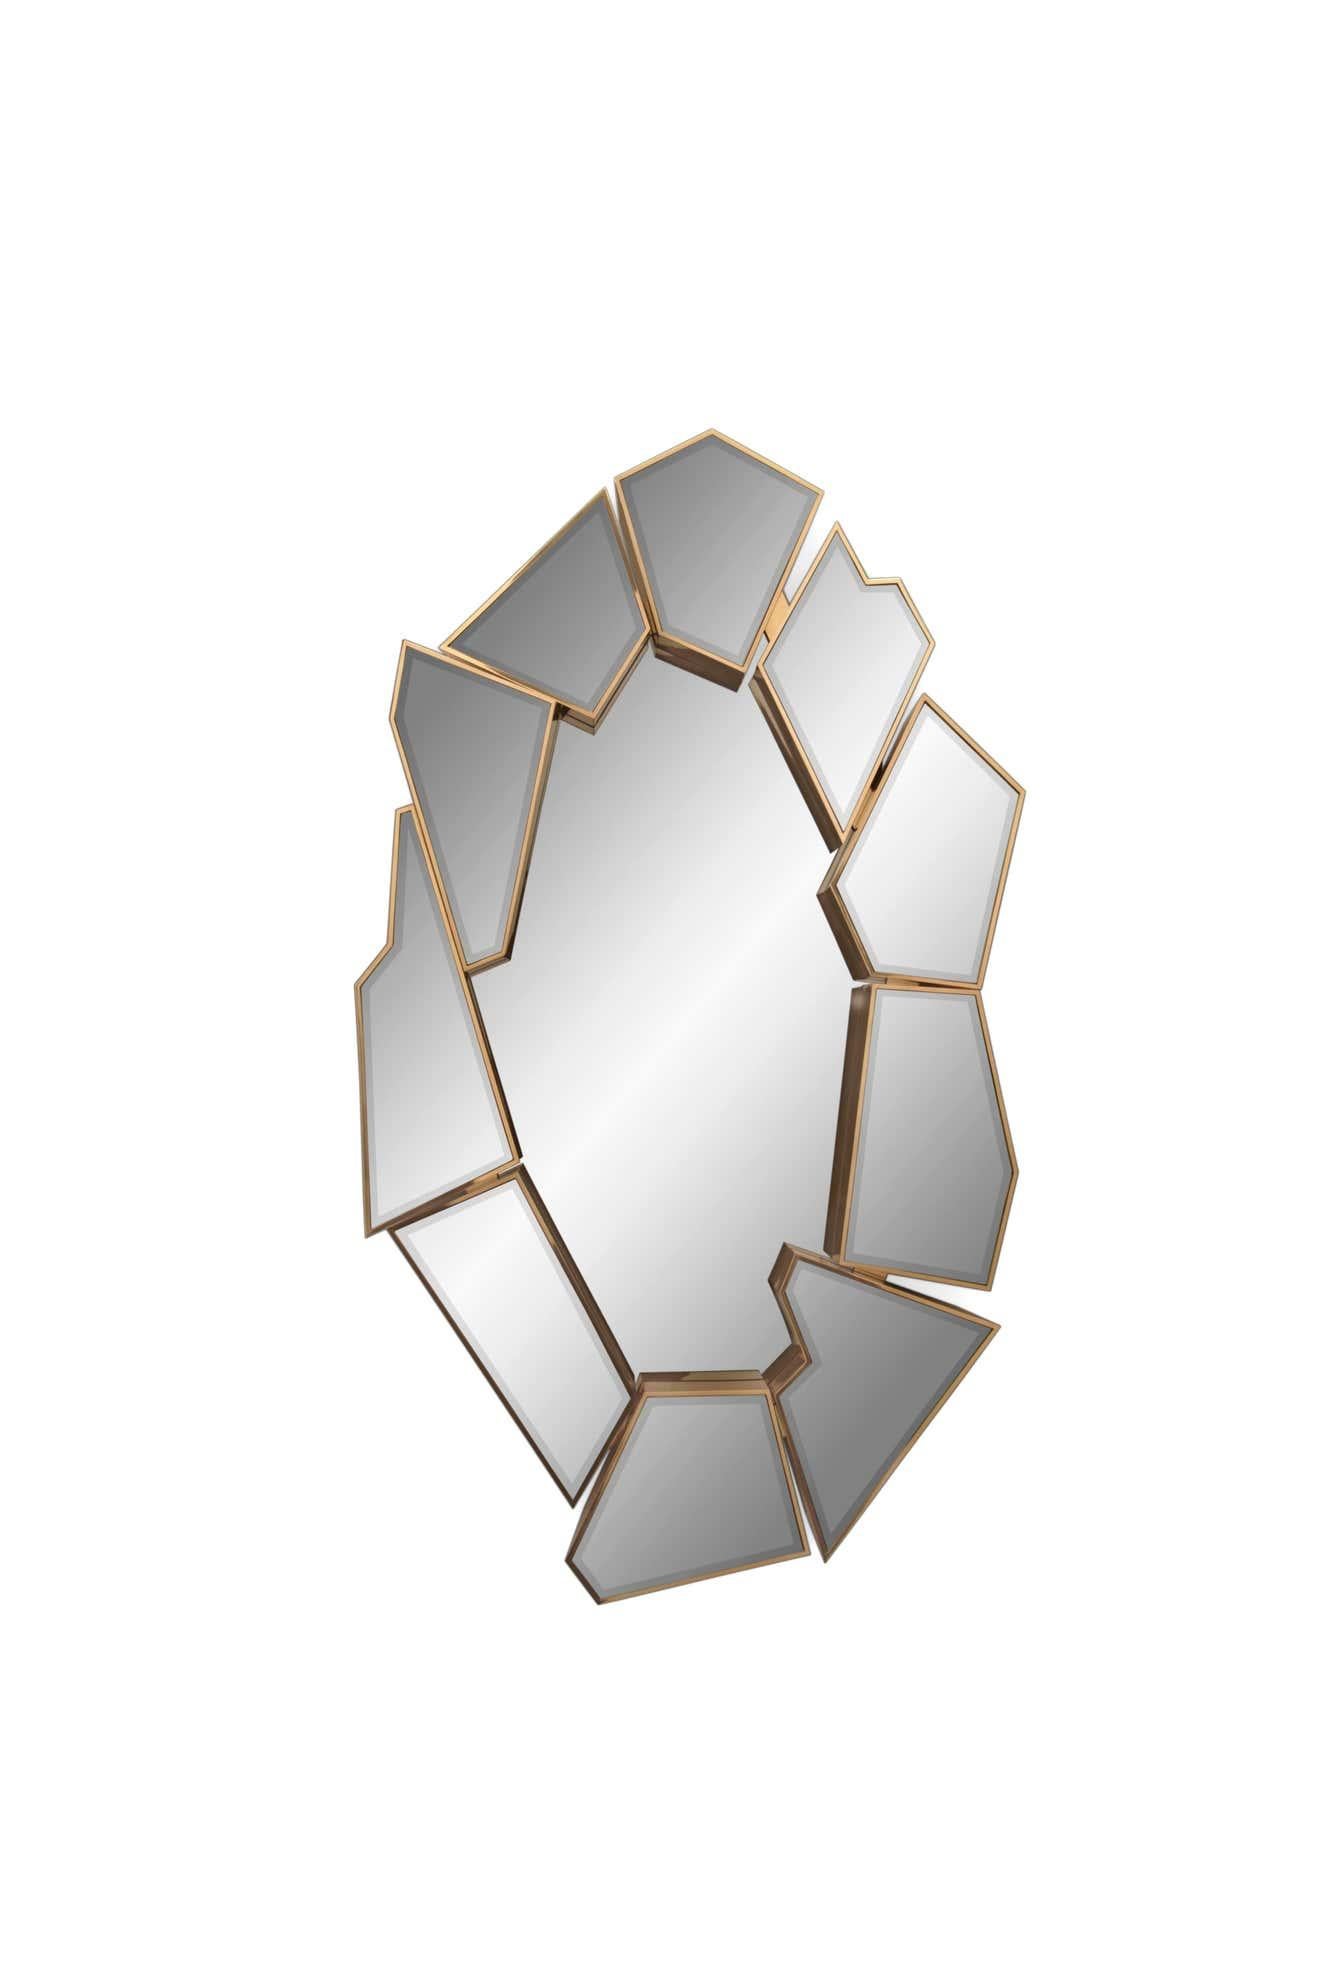 Mirror glass shards
Materials: smoked glass and gold-plated brass.
Estimated production time: 12 - 13 weeks
Meaures: Height: 144 cm
Width: 82 cm
Depth: 13 cm.